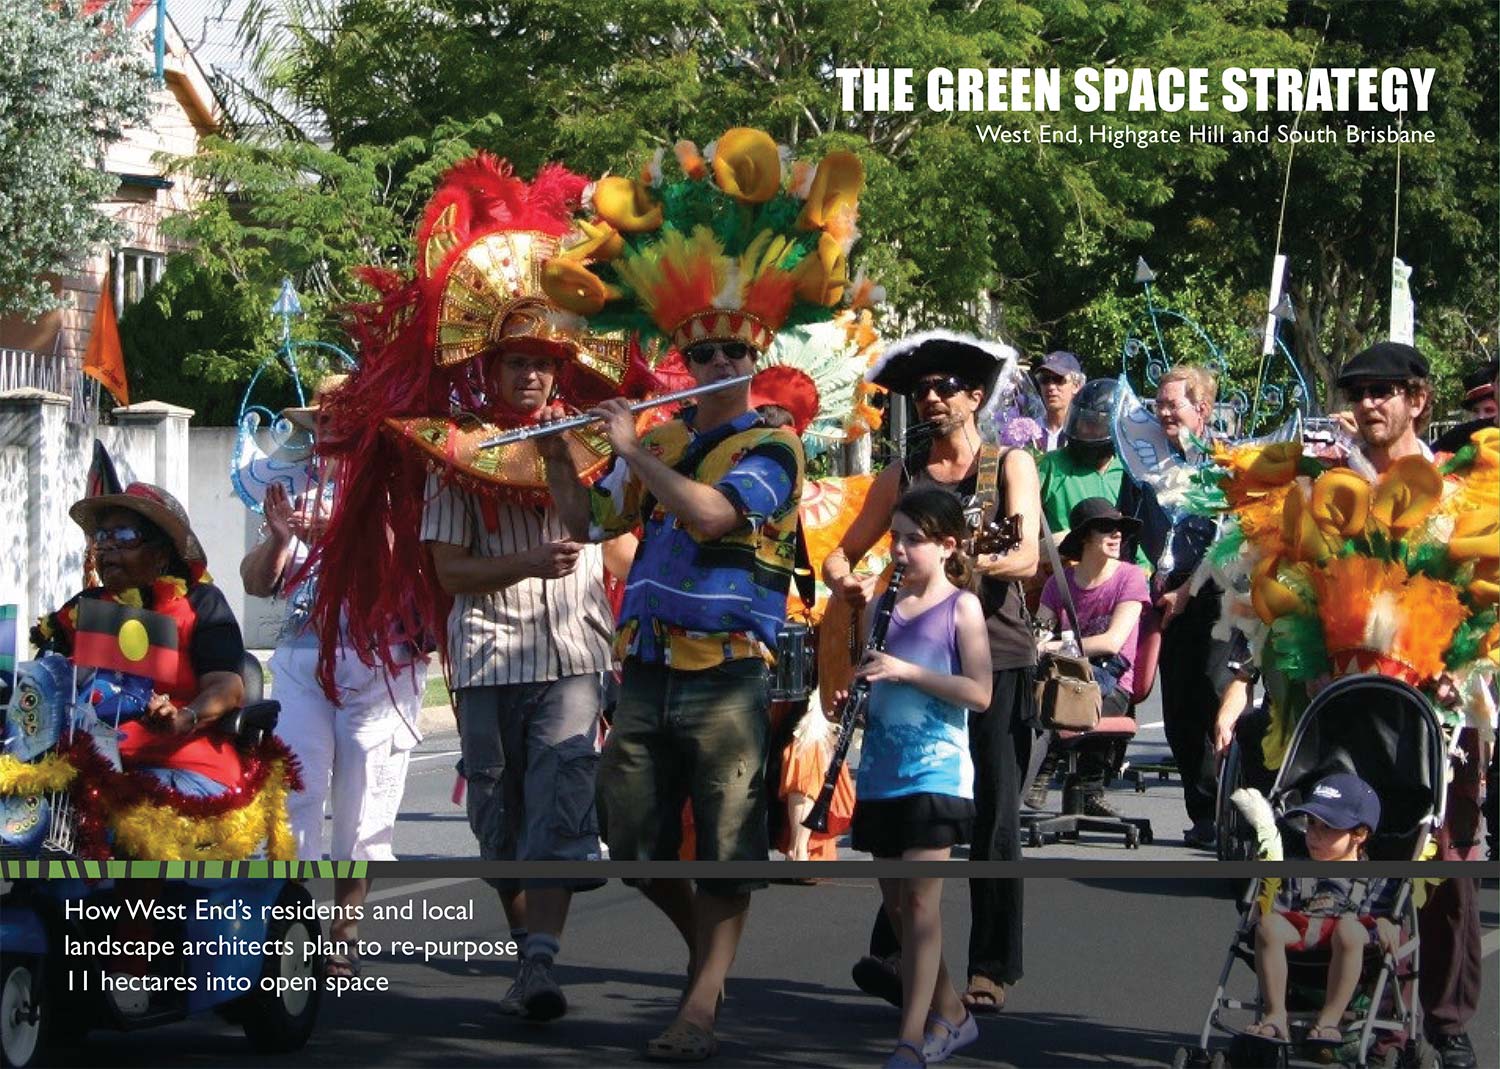 The Green Space Strategy